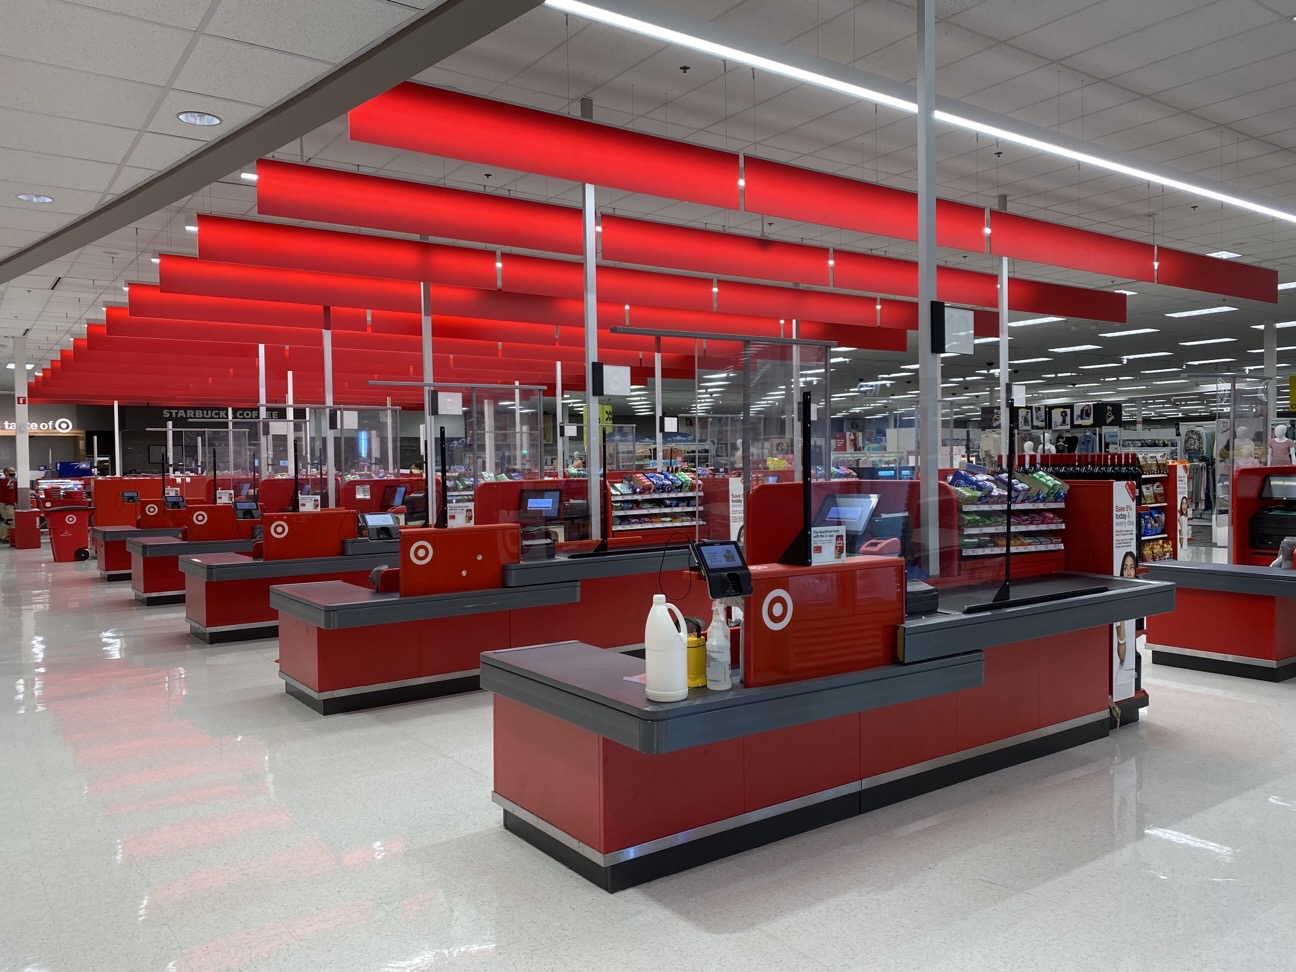 a store with red shelves and red lights